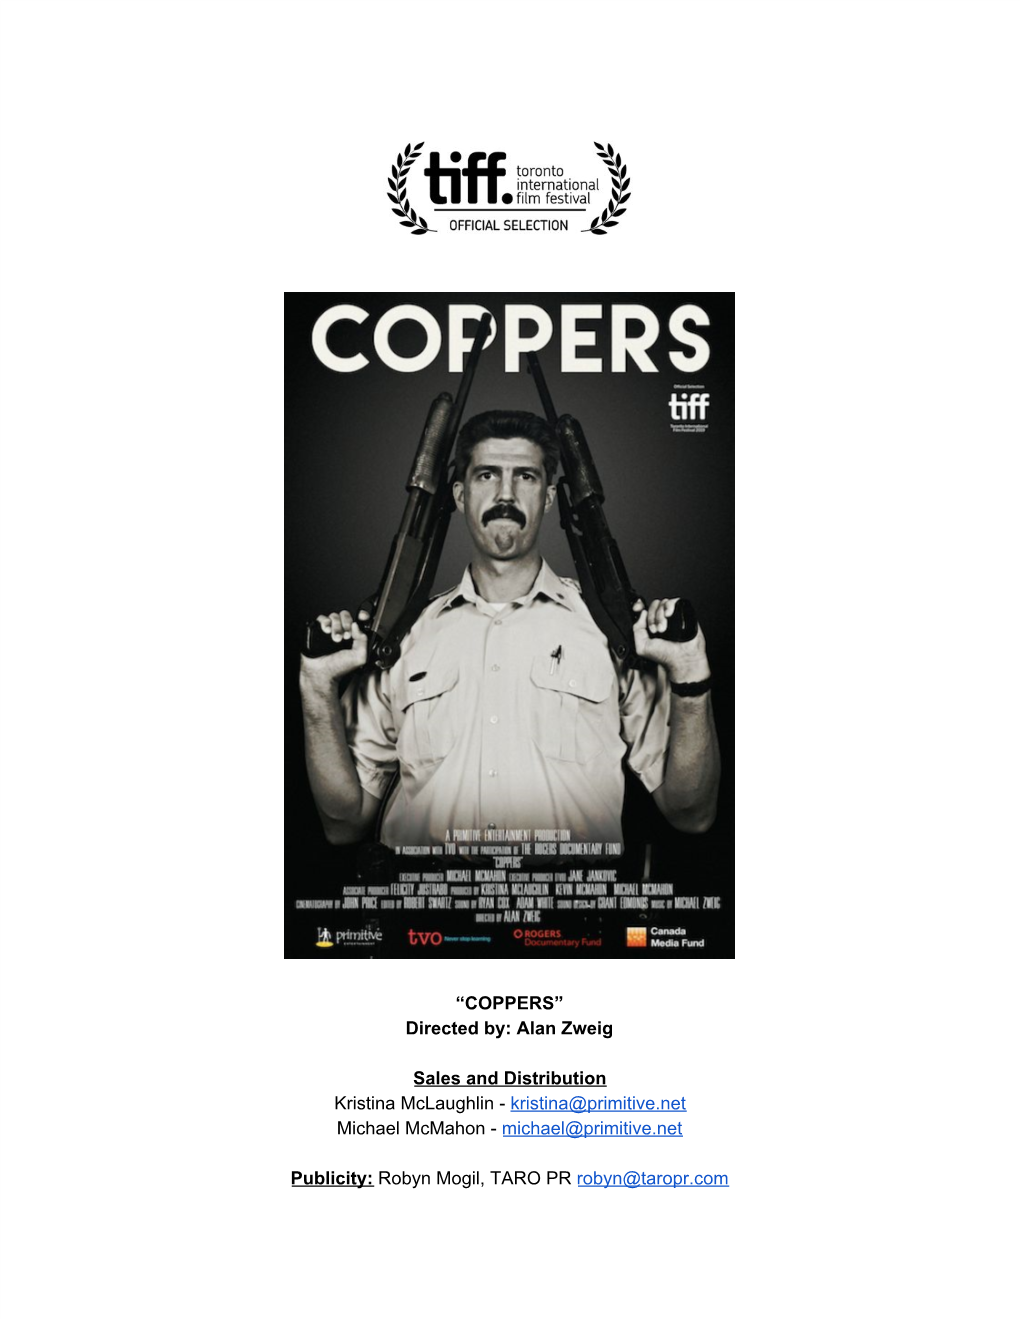 COPPERS” Directed By: Alan Zweig